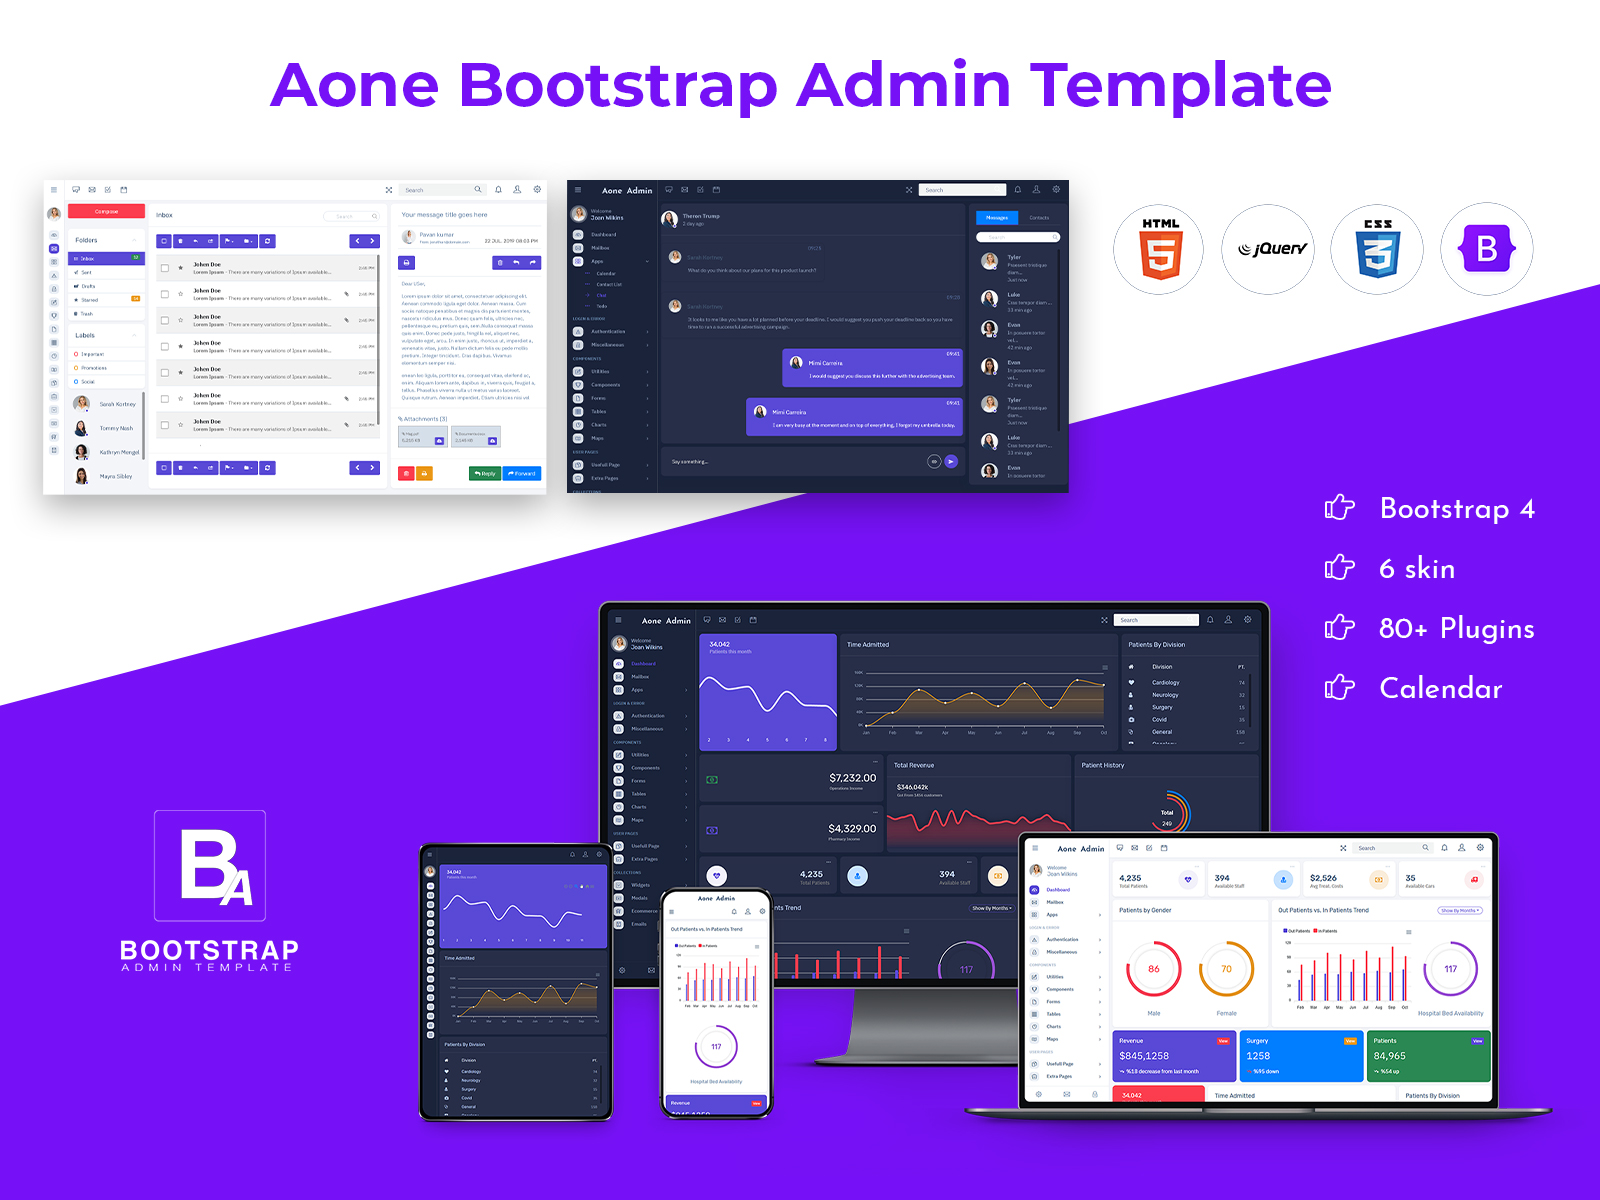 Boost Your App With A Bootstrap Admin Template: Aone